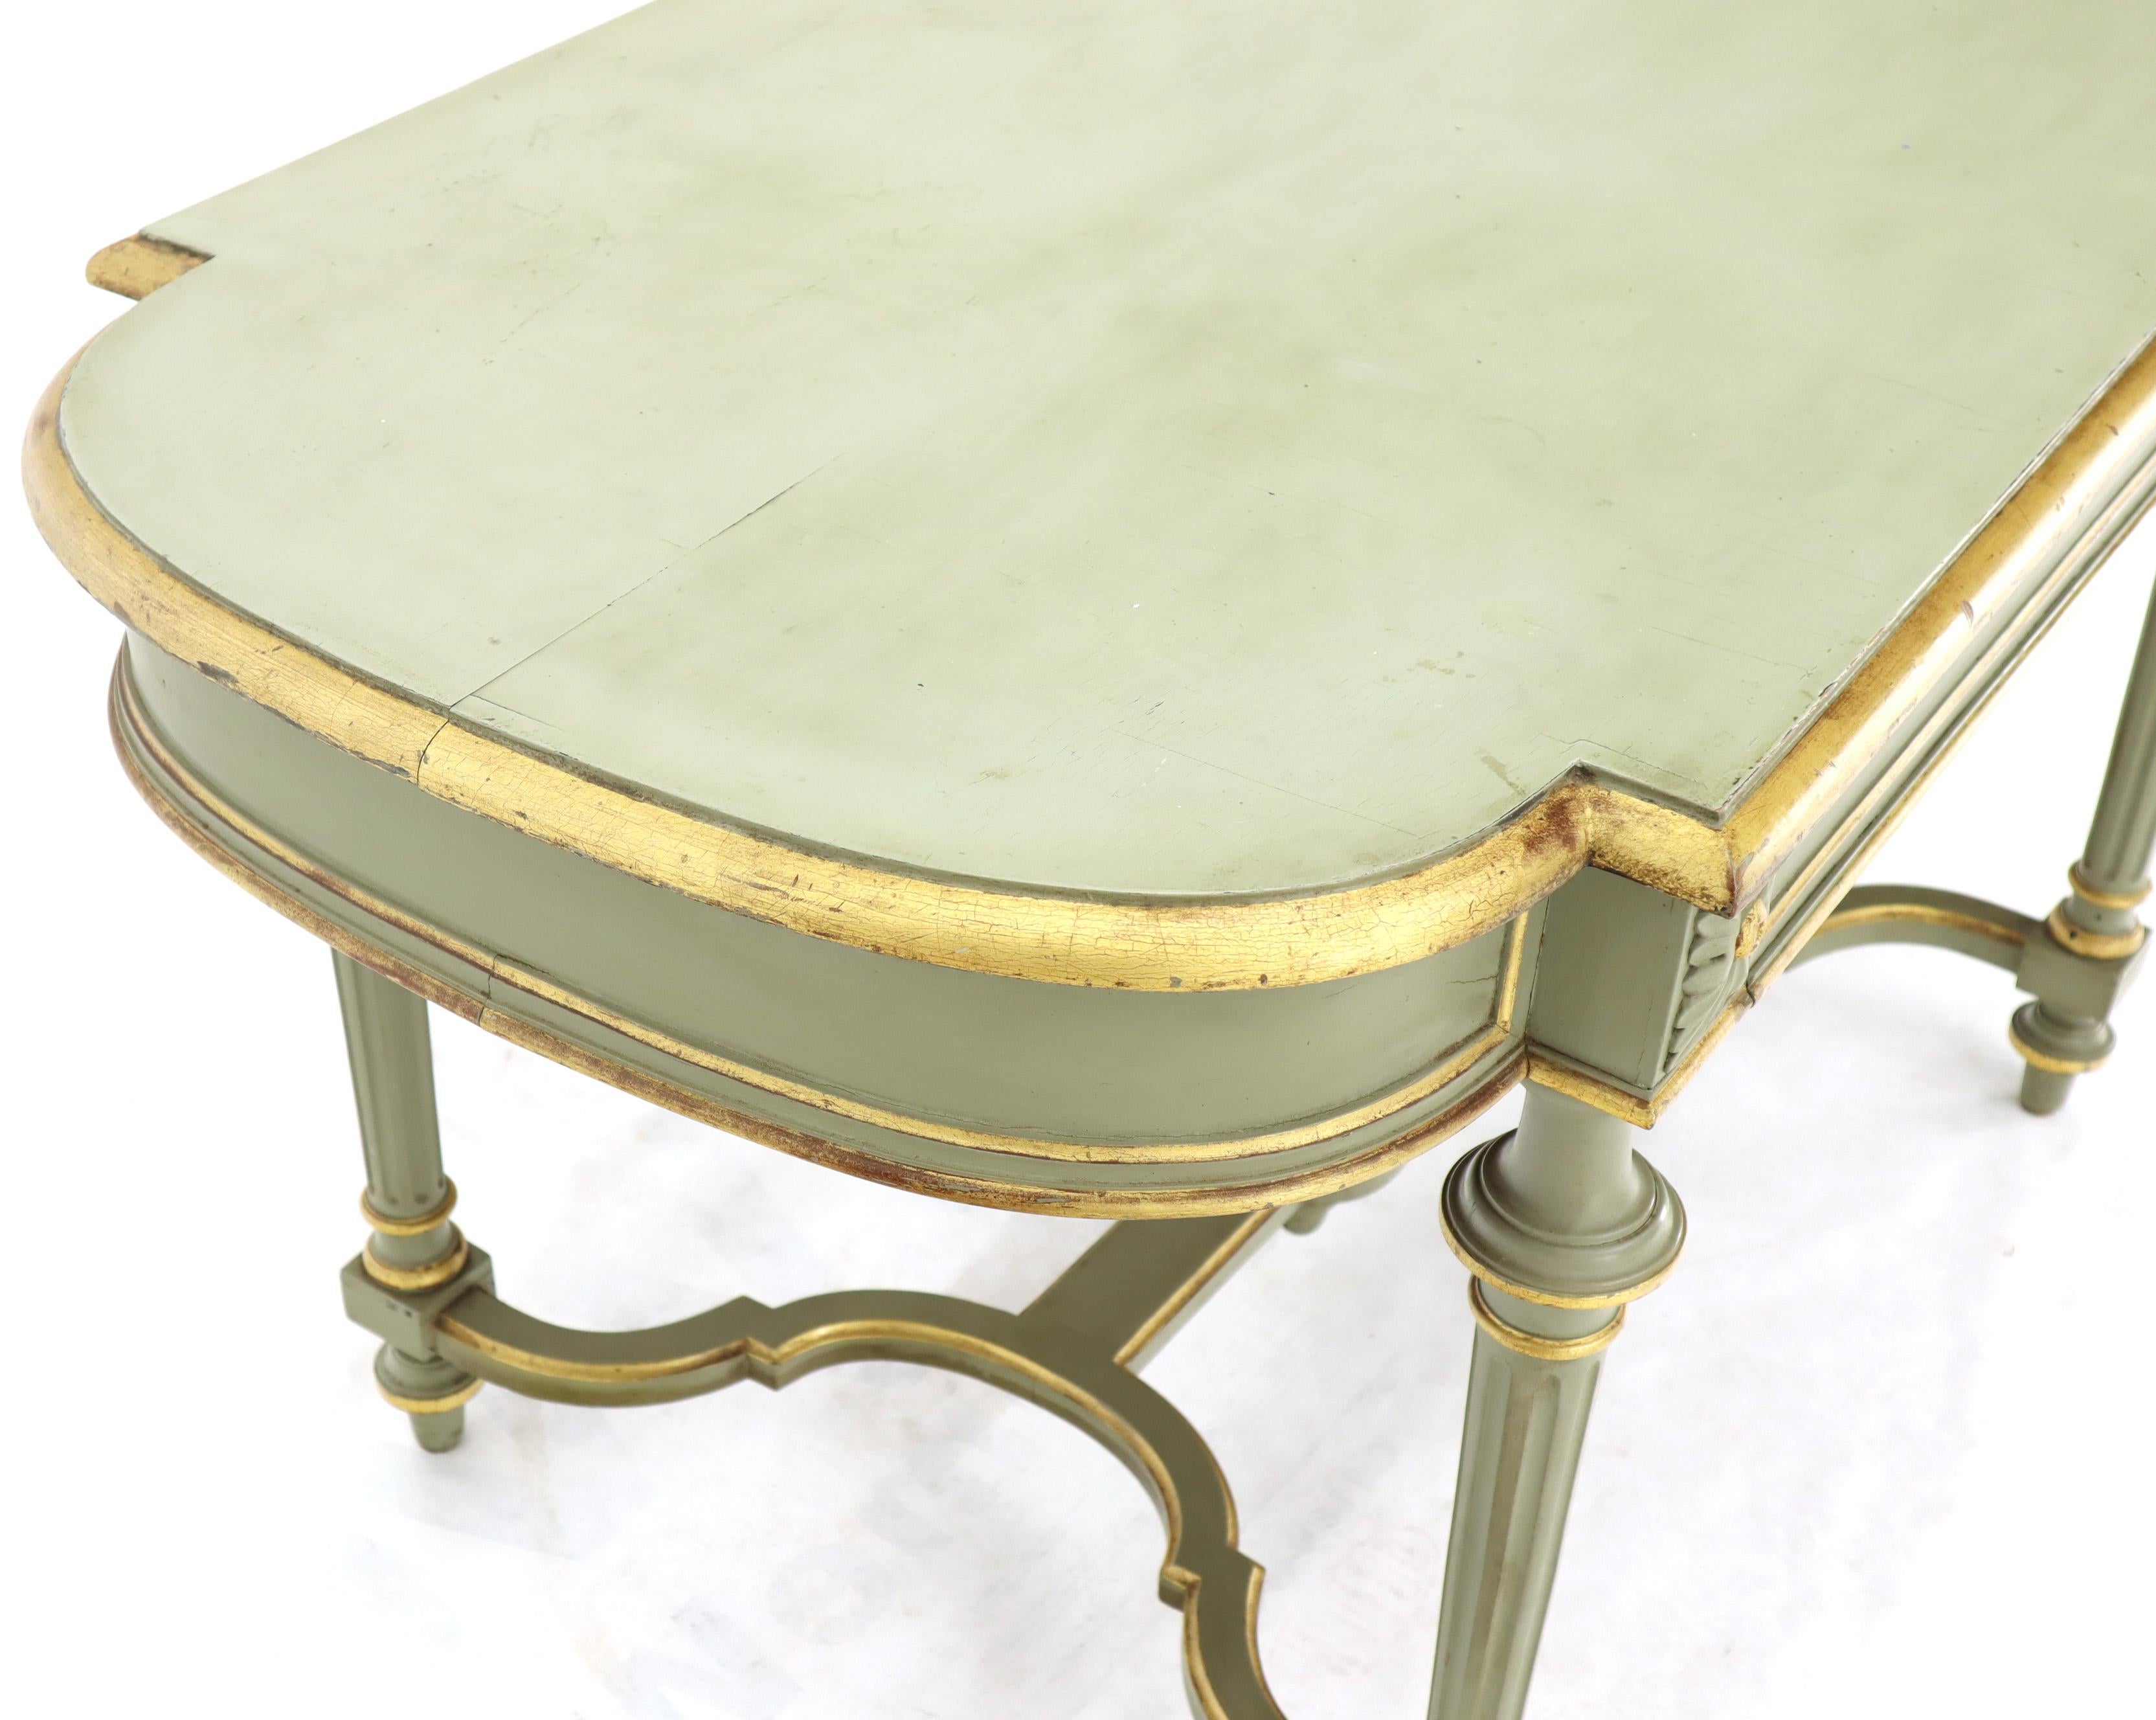 French Provincial Shabby Chic and Gold Leaf Distressed Antique Writing Table Desk Large Console For Sale